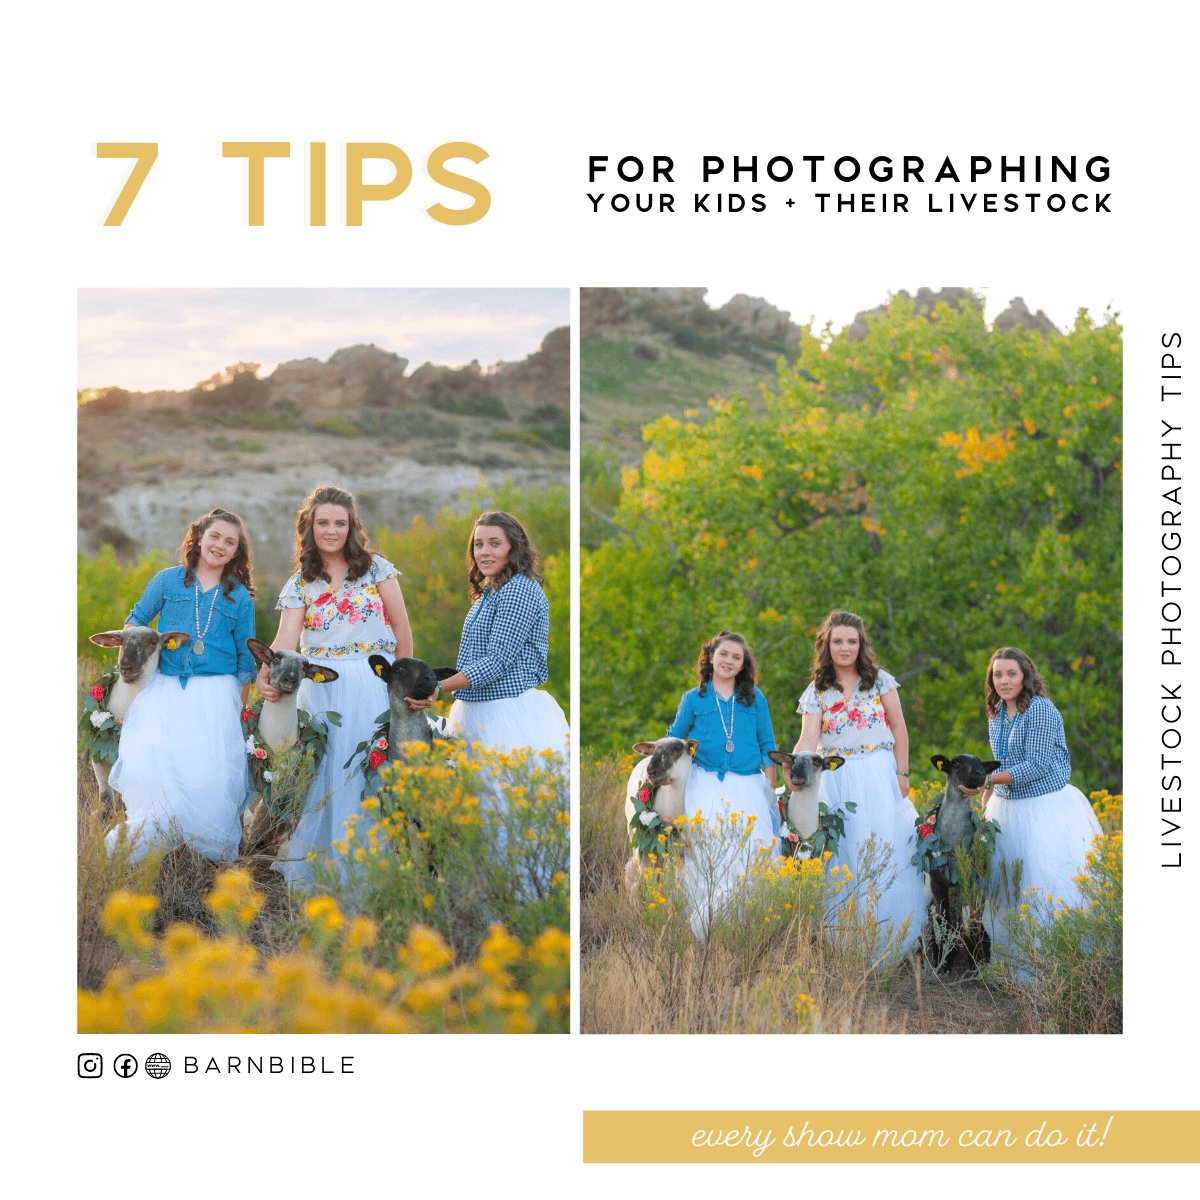 7 Tips for Photographing Your Kids and Their Livestock - Livestock & Co.